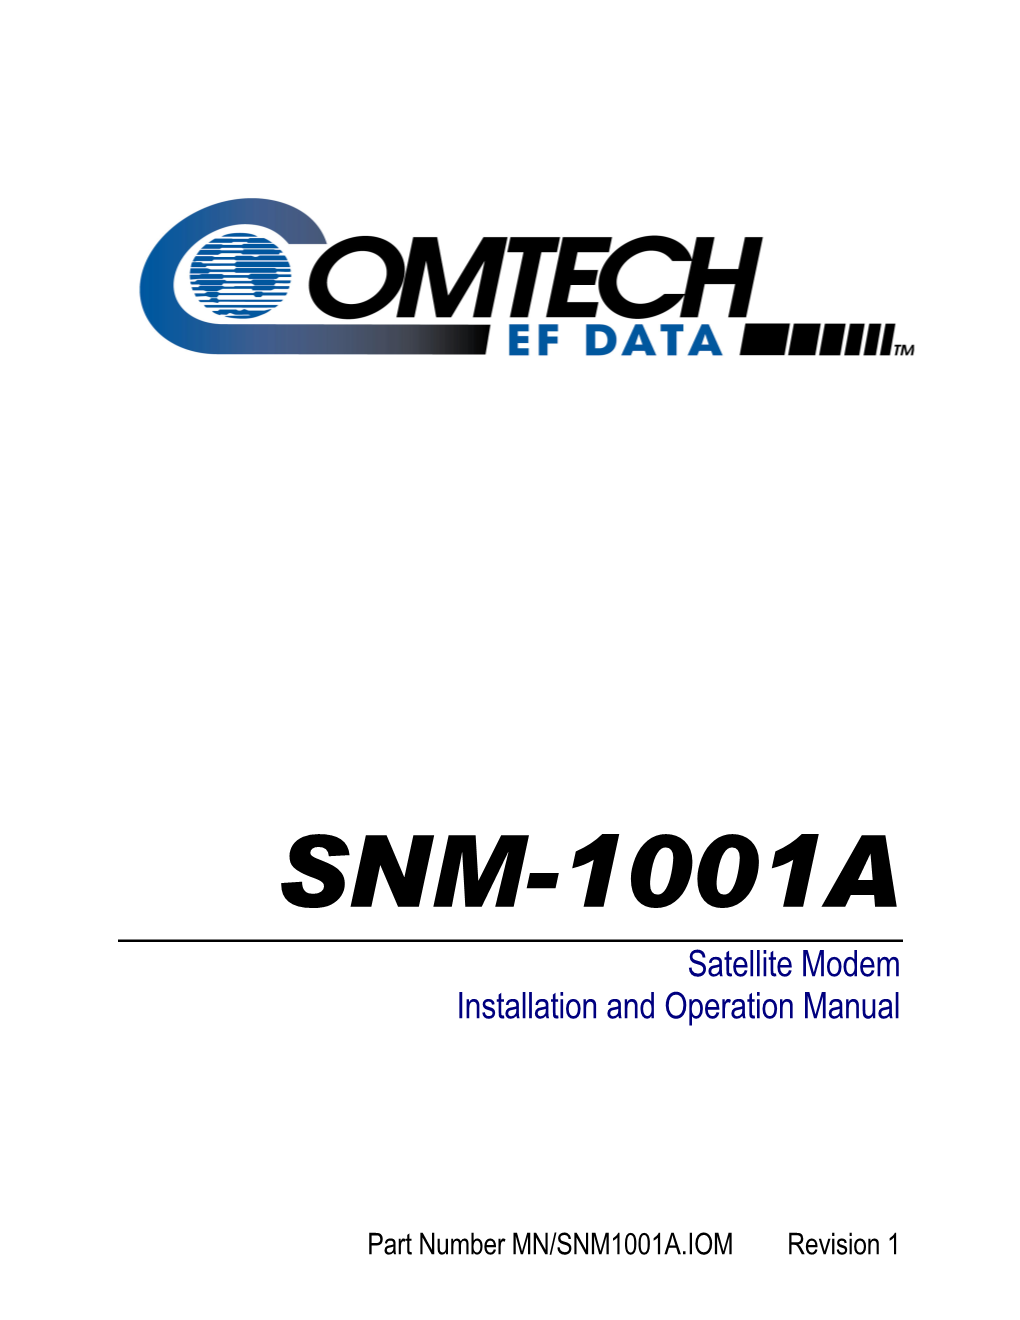 SNM-1001A Satellite Modem Installation and Operation Manual